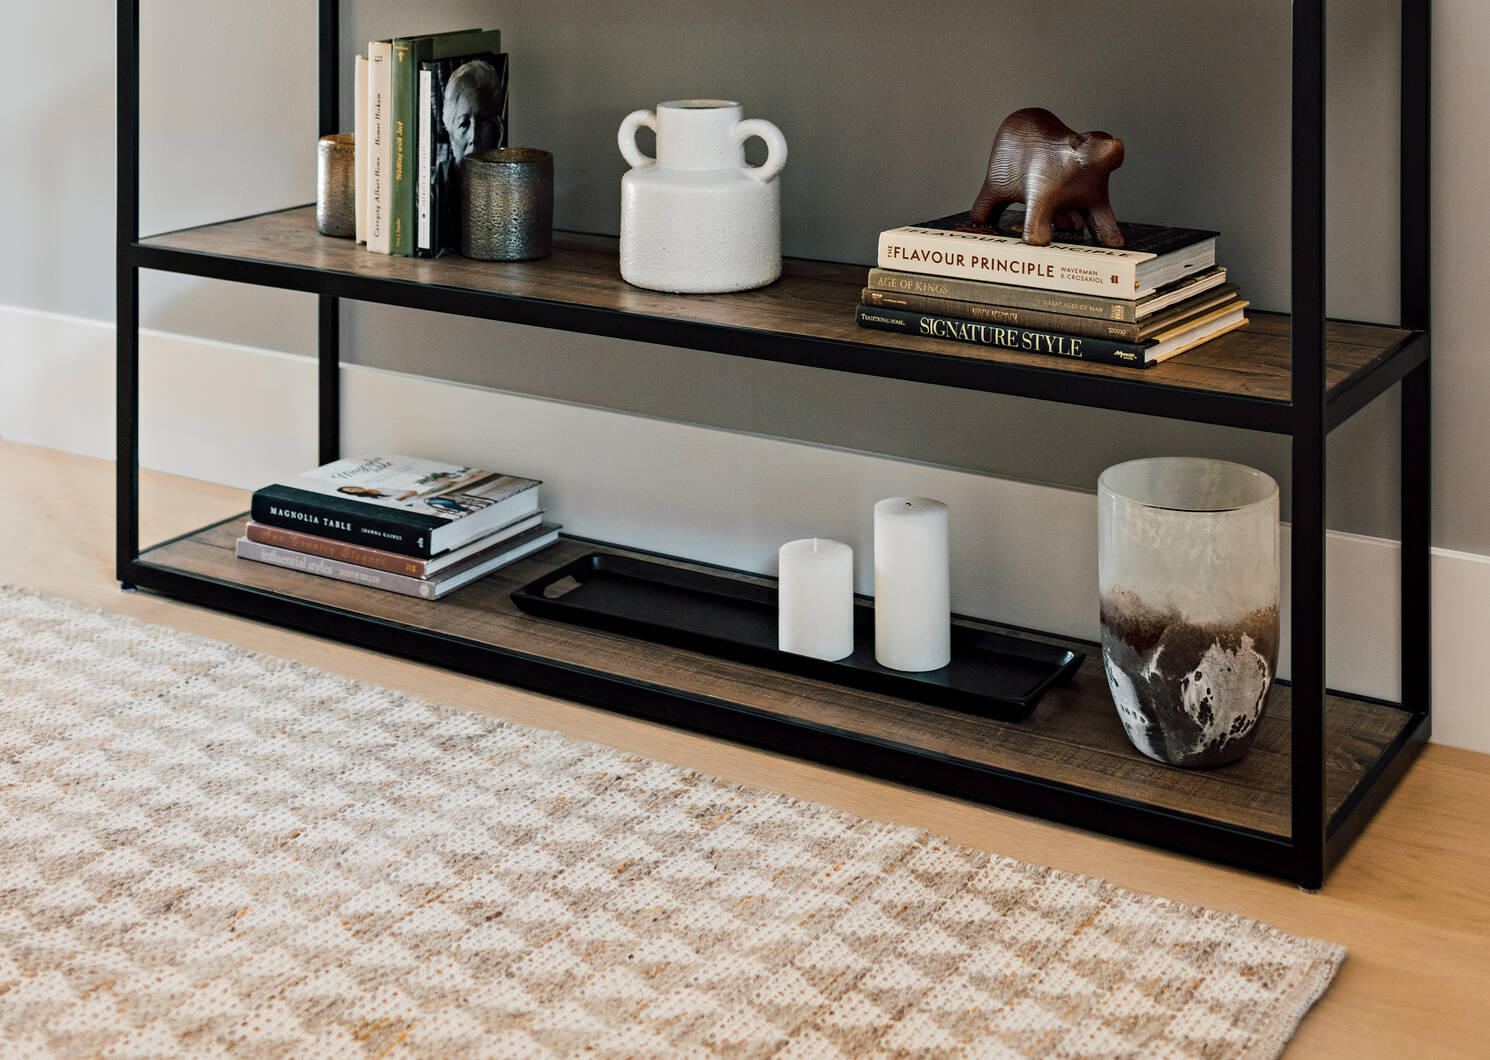 Ethan Accent Rugs Ivory/Natural